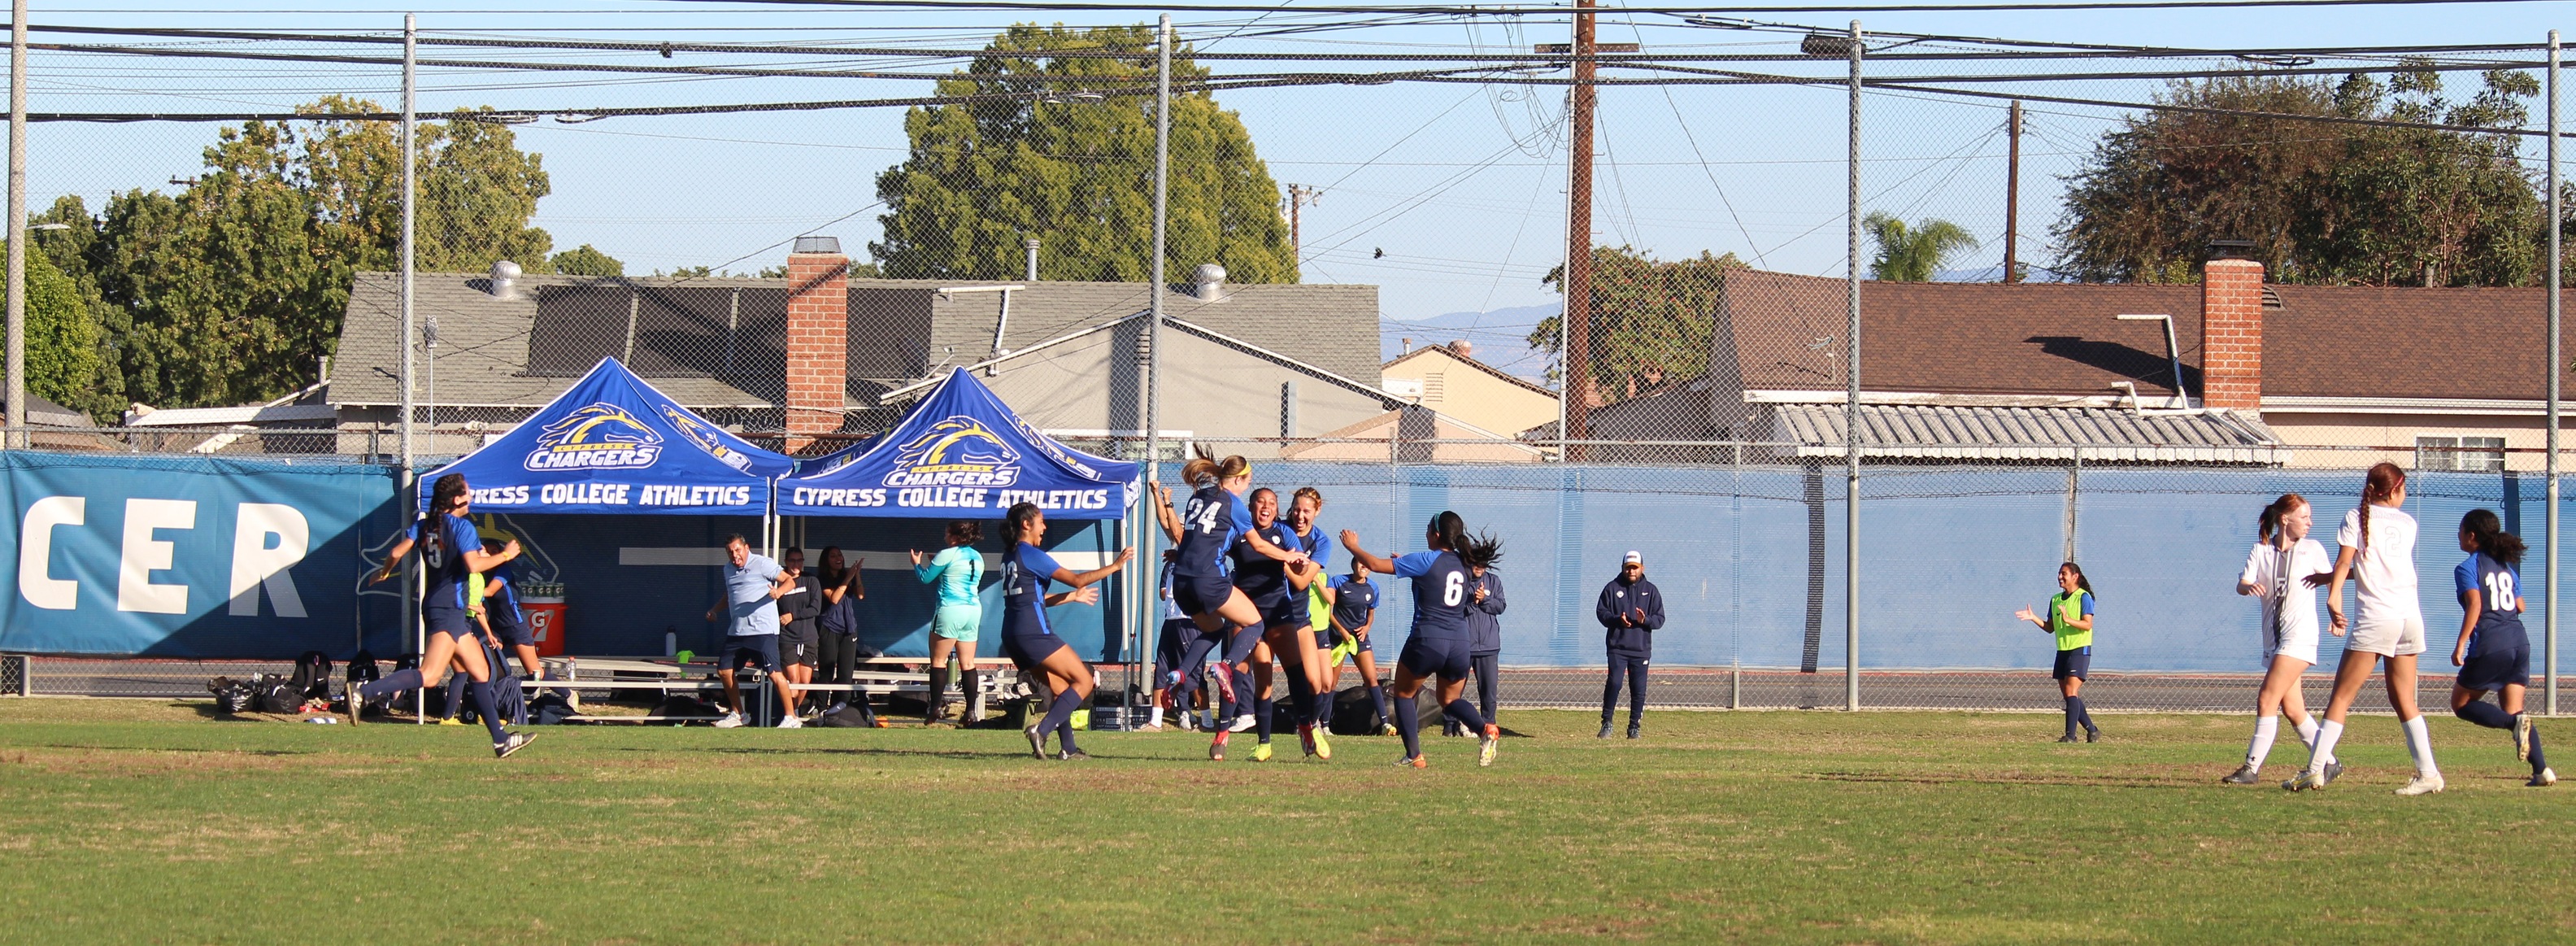 Women’s Soccer Advances in Playoffs After Shutout Victory